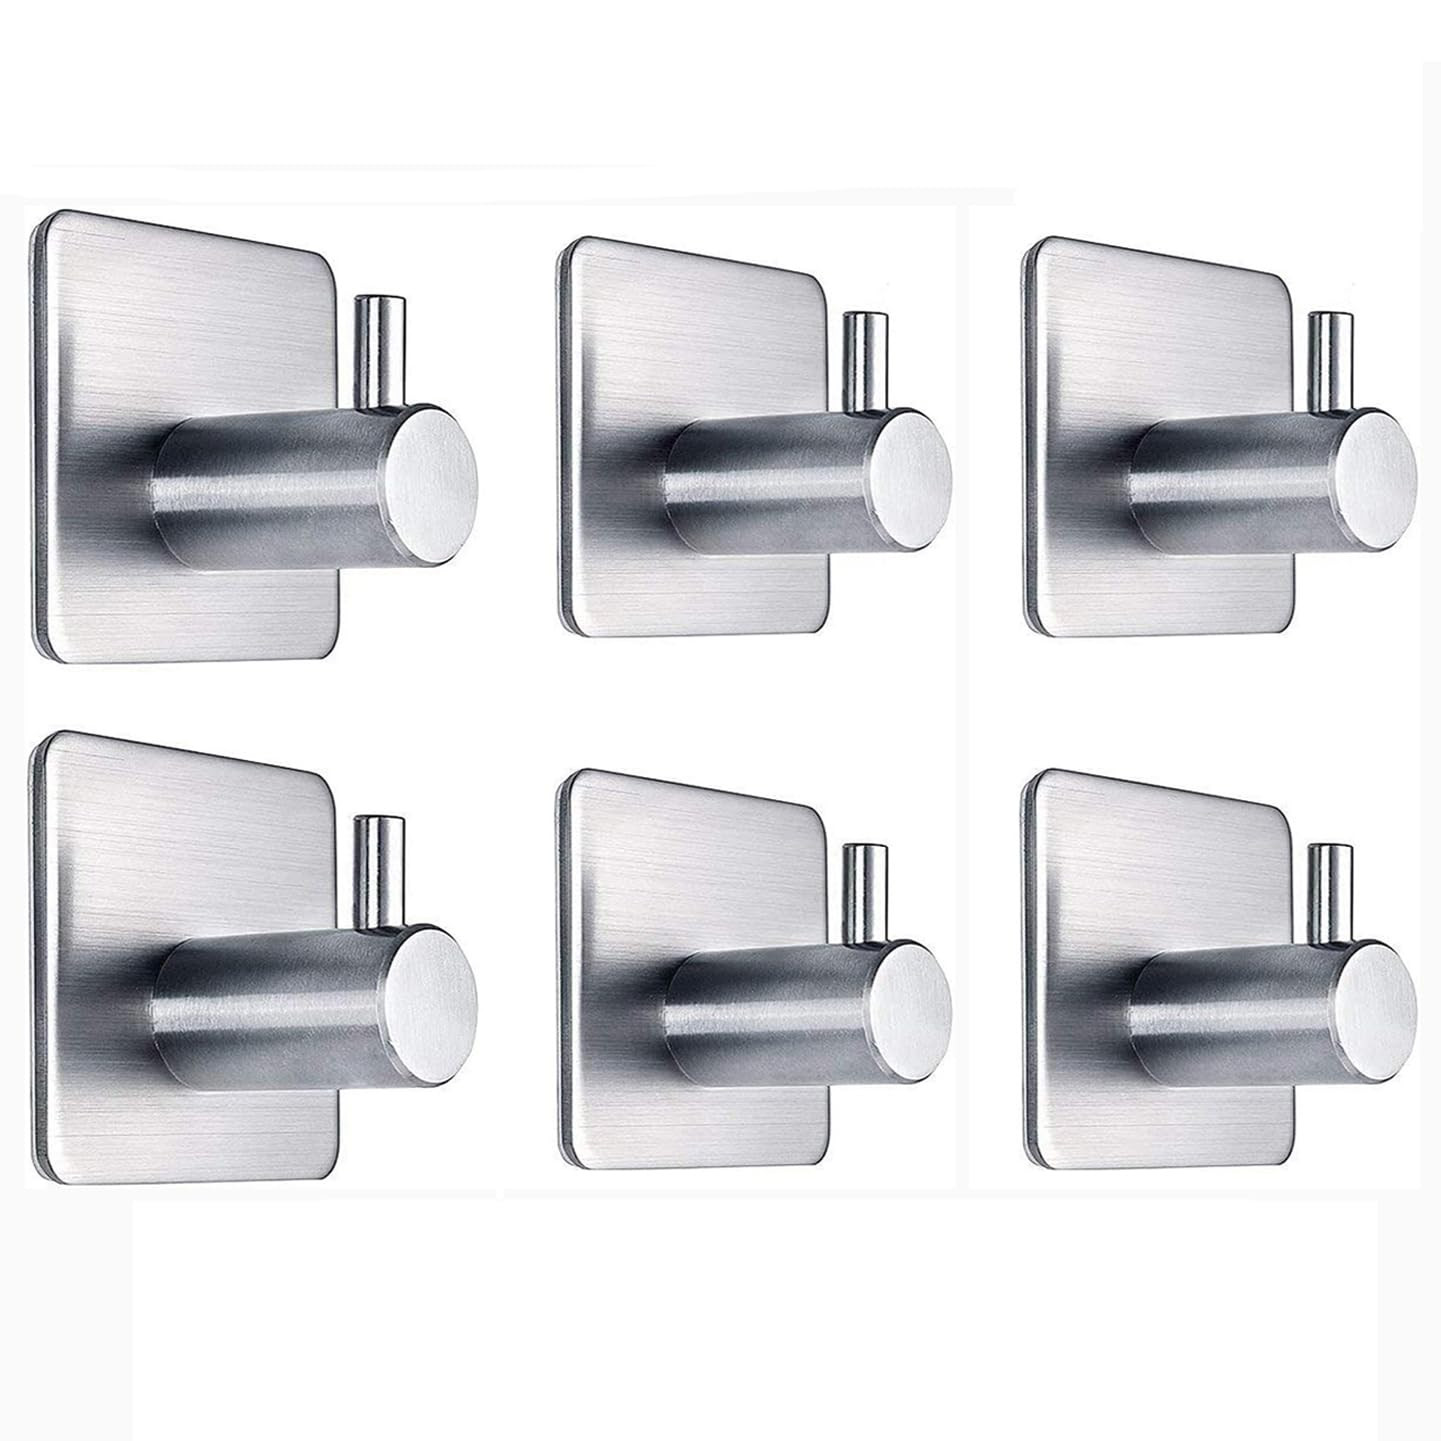 DClub Heavy Duty Adhesive Hooks Stick on Wall Hangers Strong Stainless  Steel Holder Self Adhesive Hooks